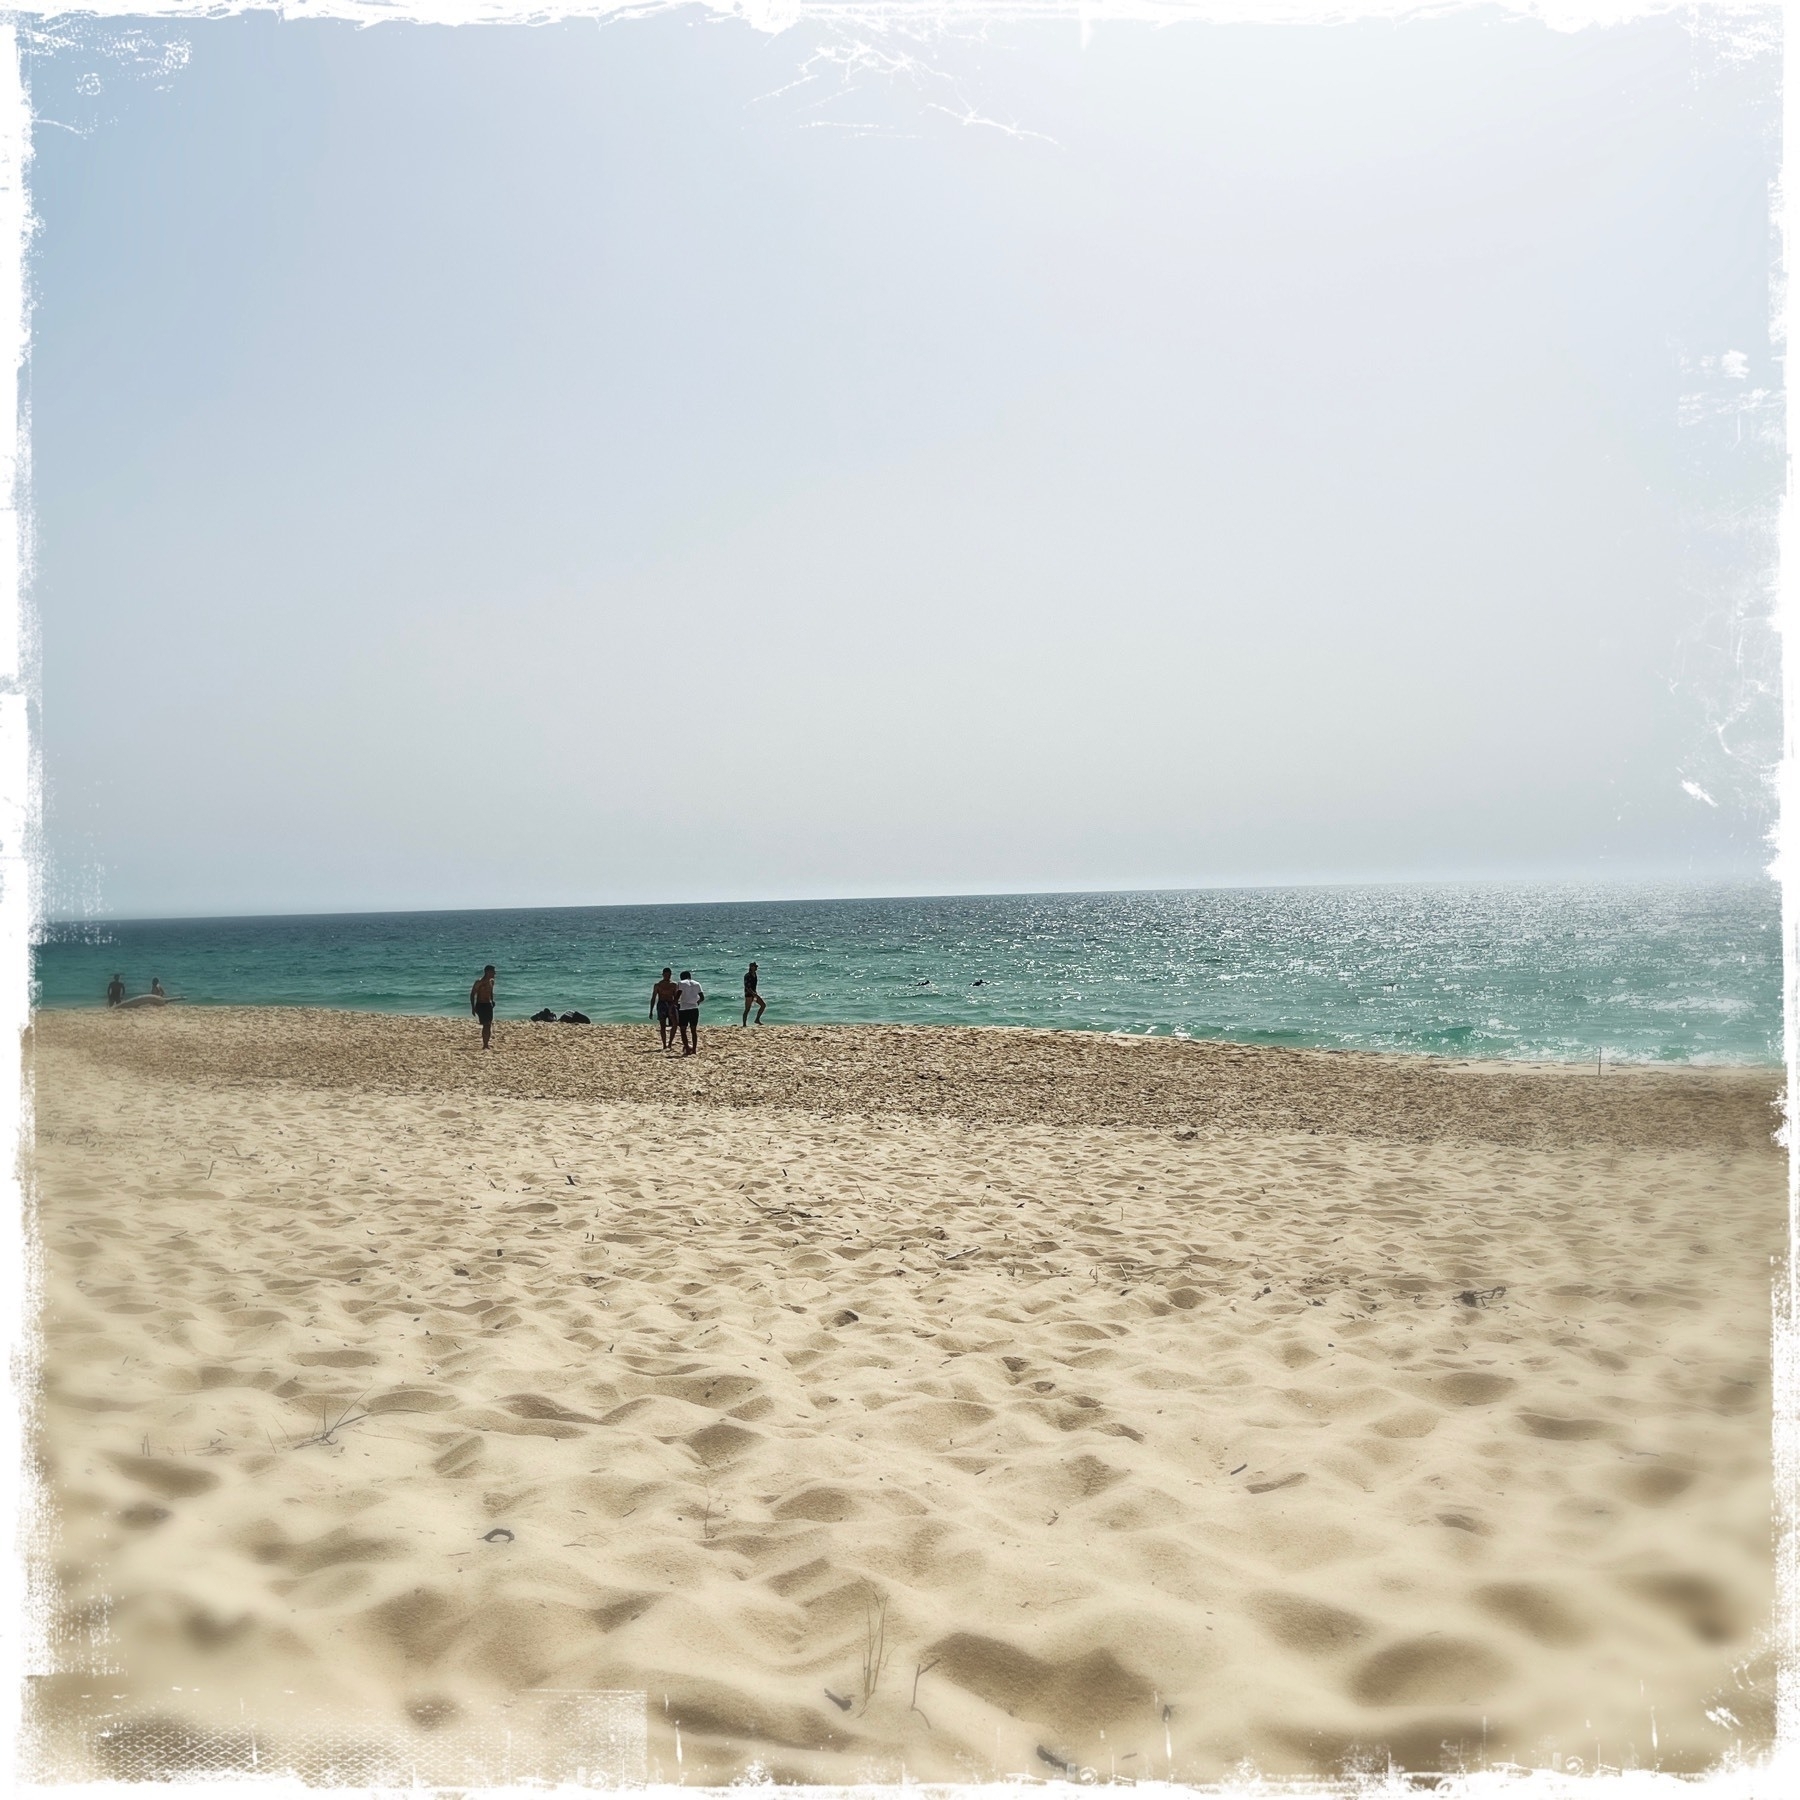 The beach at Comporta, Portugal on a sunny day with a cool wind